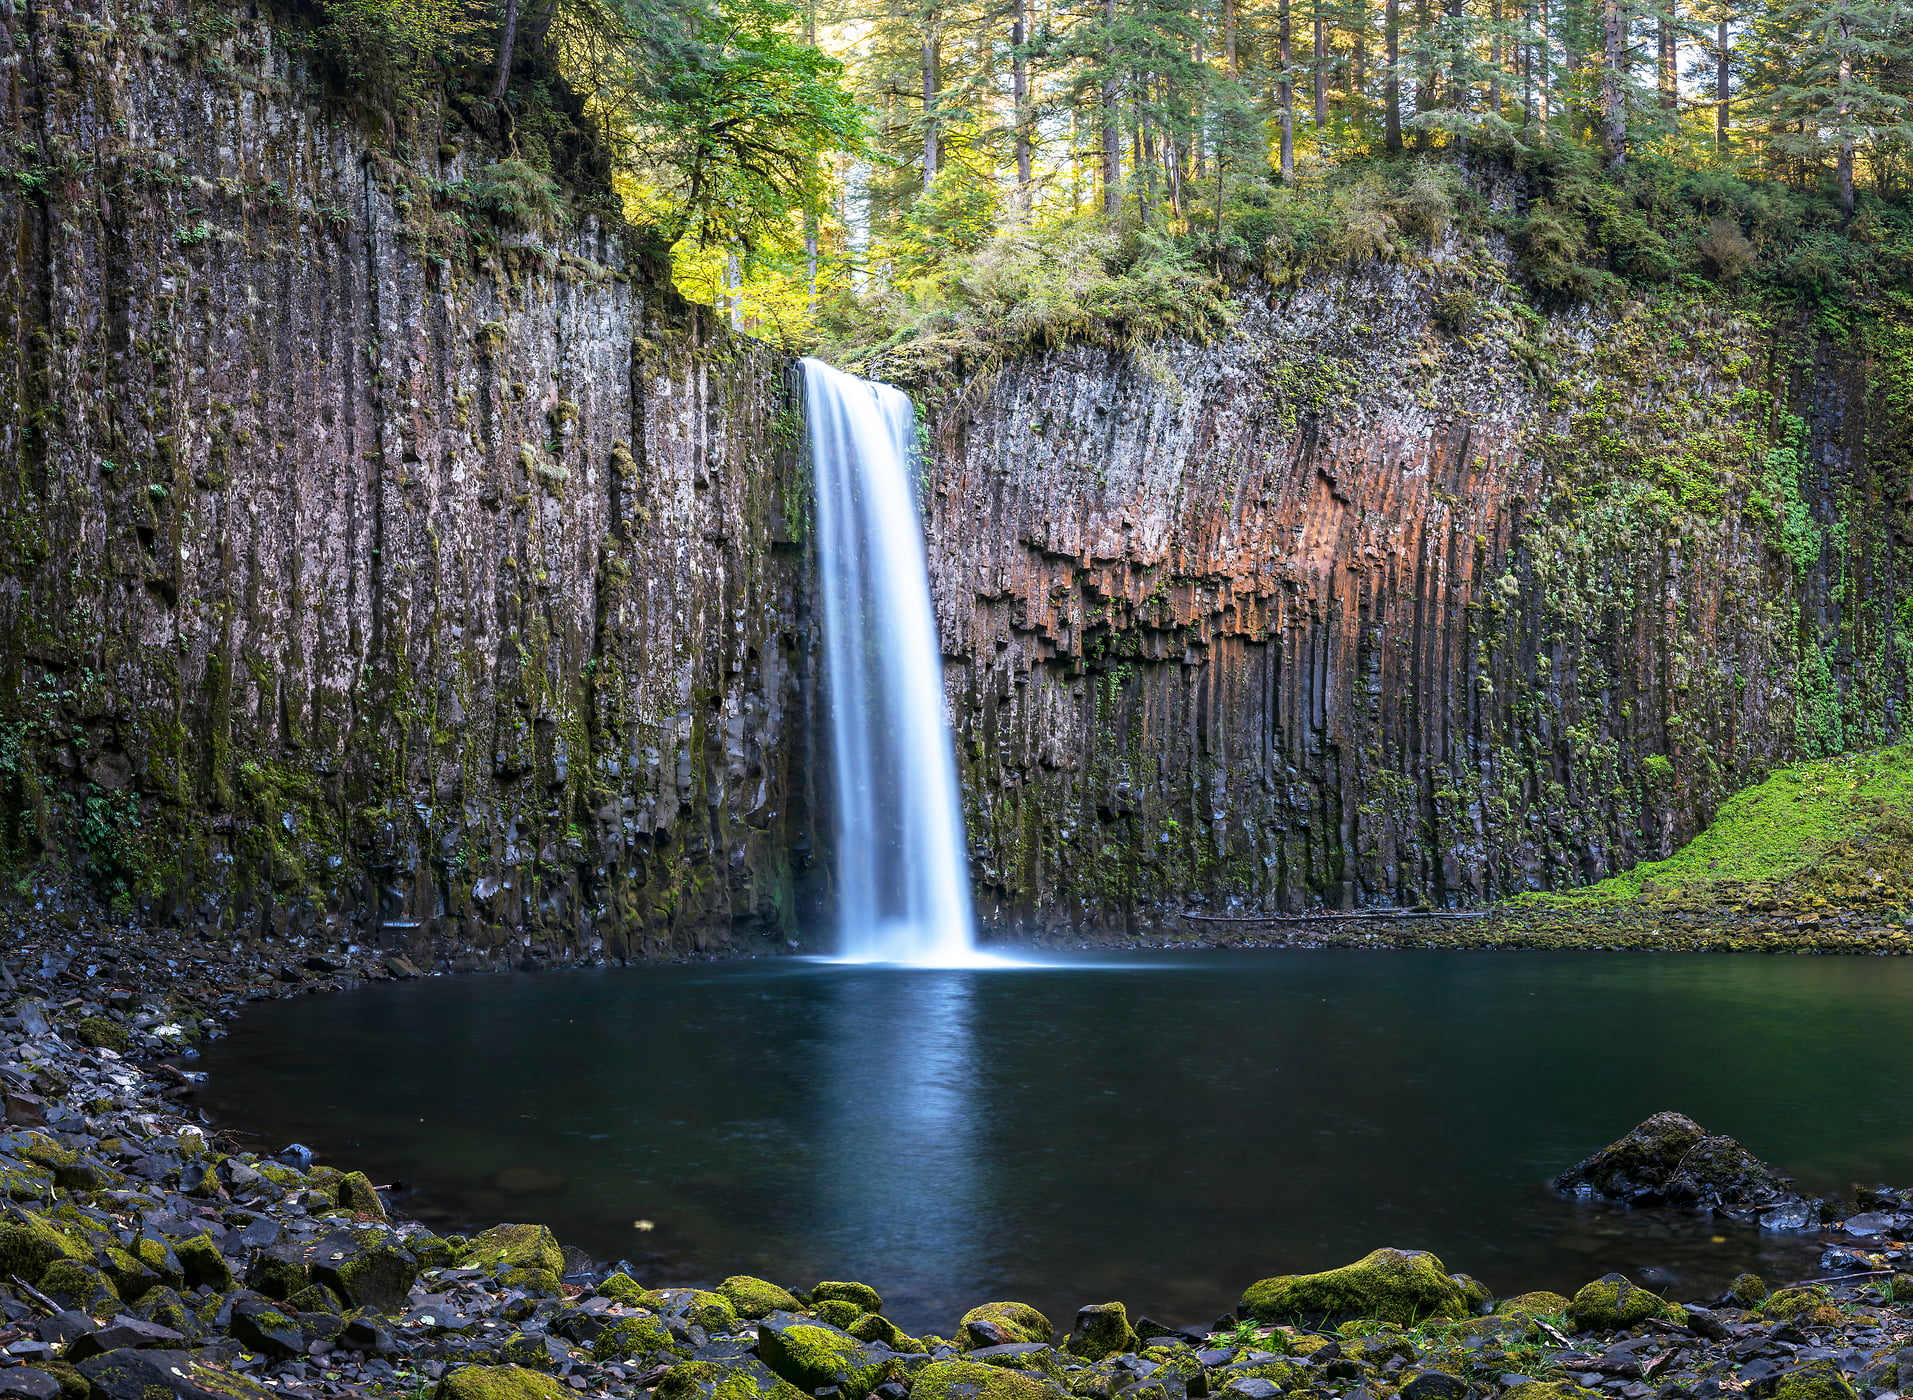 607 megapixels! A very high resolution, large-format VAST photo print of Abiqua Falls waterfall in a forest; nature fine art print created by Justin Katz in Oregon.